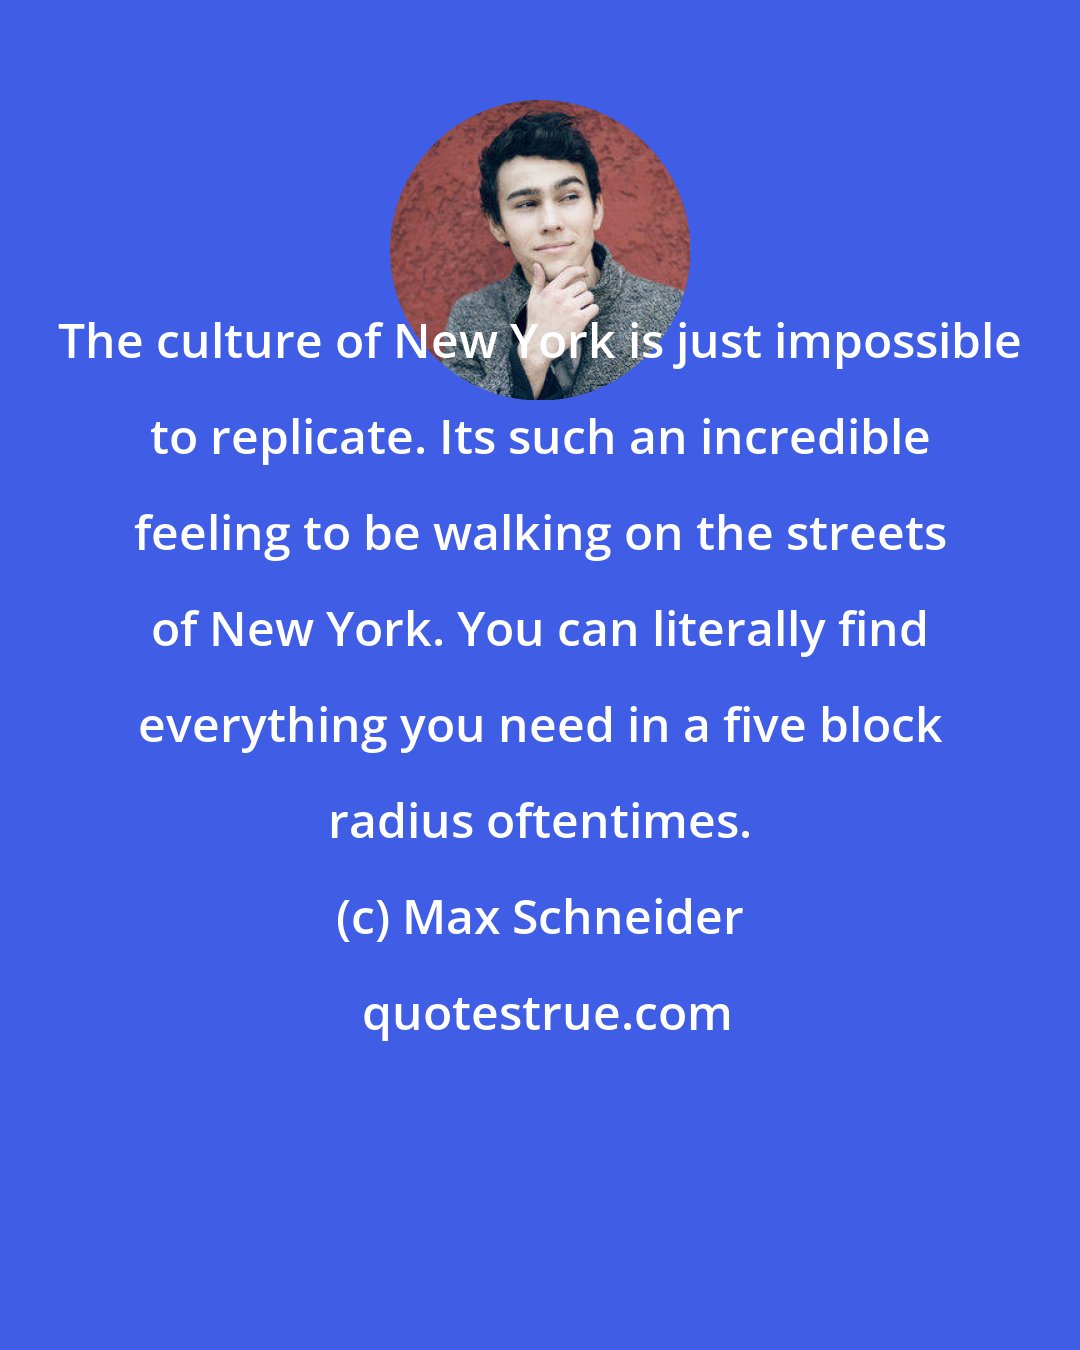 Max Schneider: The culture of New York is just impossible to replicate. Its such an incredible feeling to be walking on the streets of New York. You can literally find everything you need in a five block radius oftentimes.